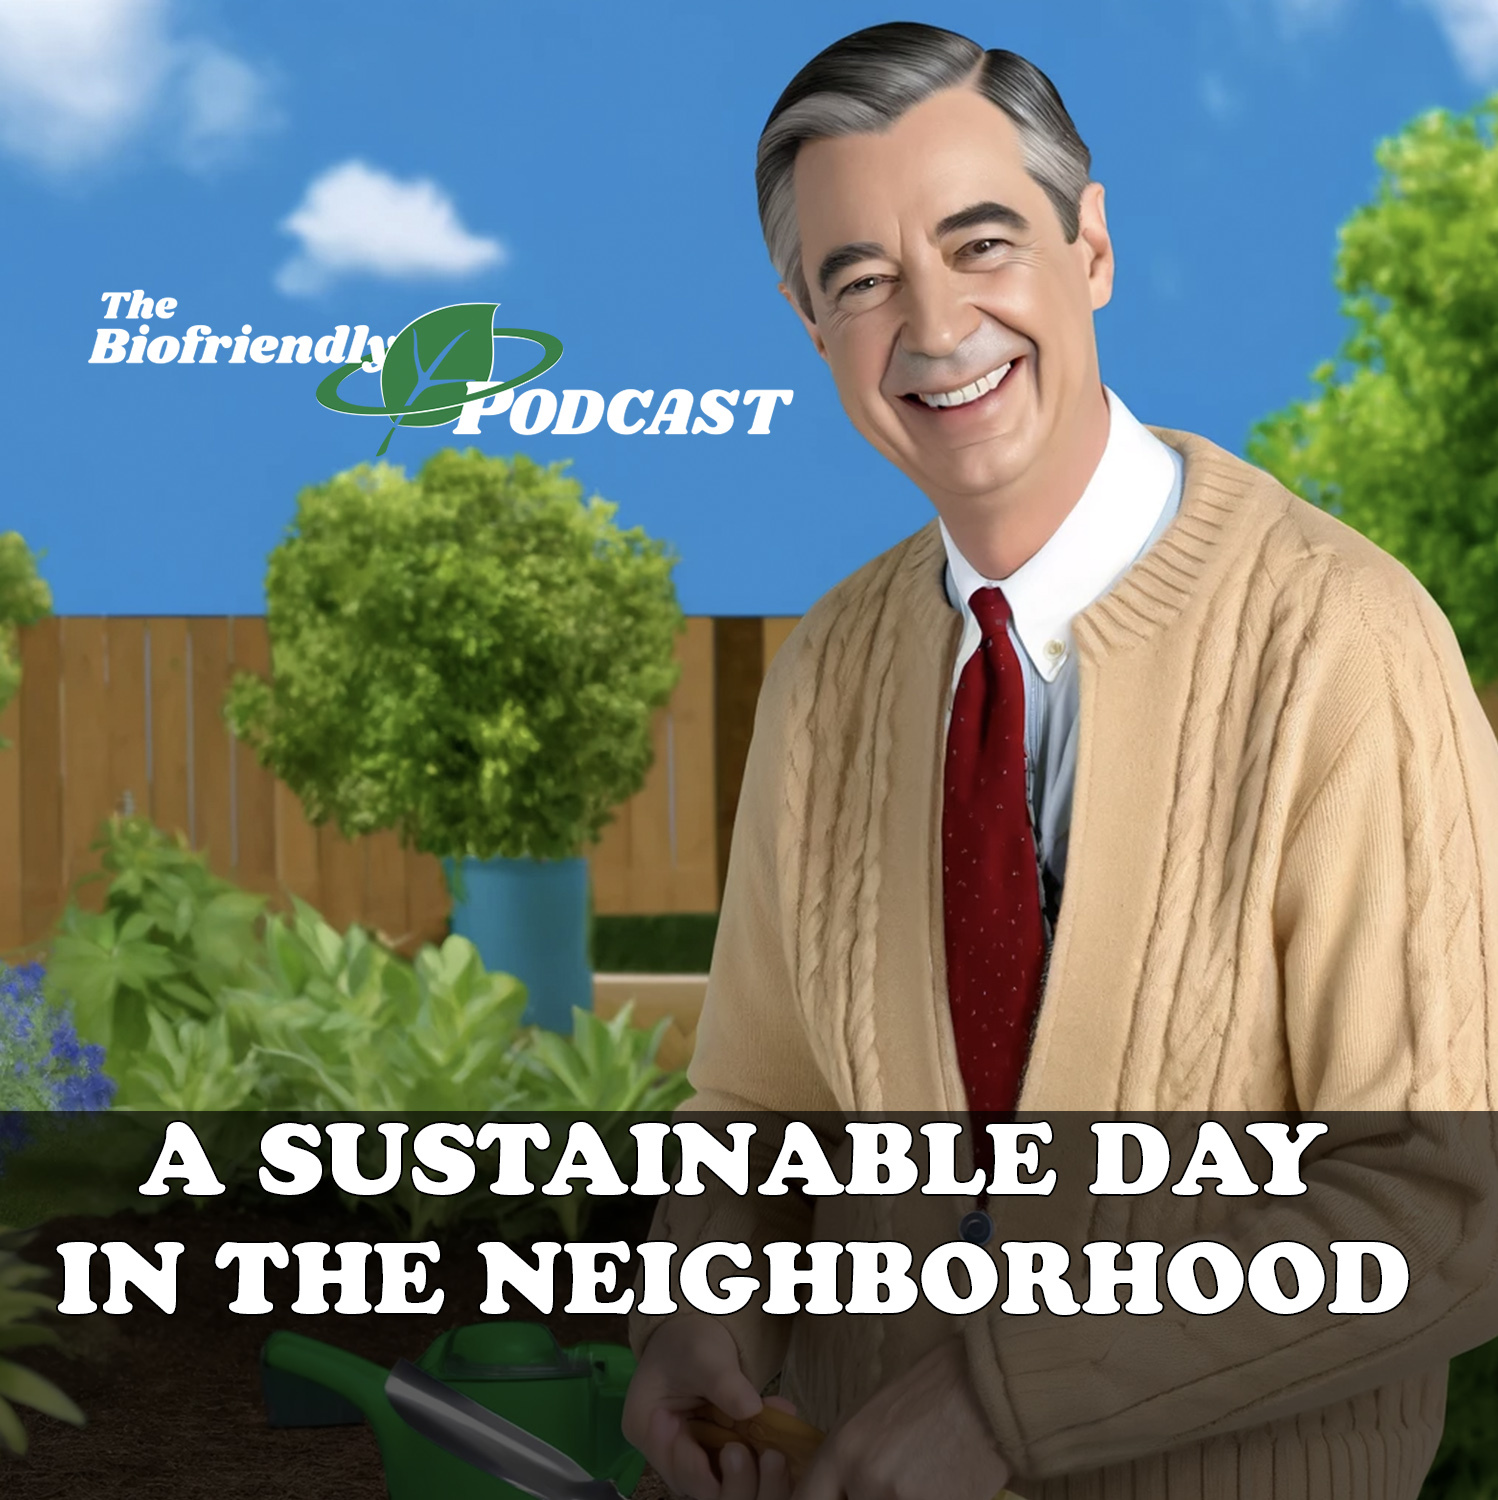 A Sustainable Day in the Neighborhood